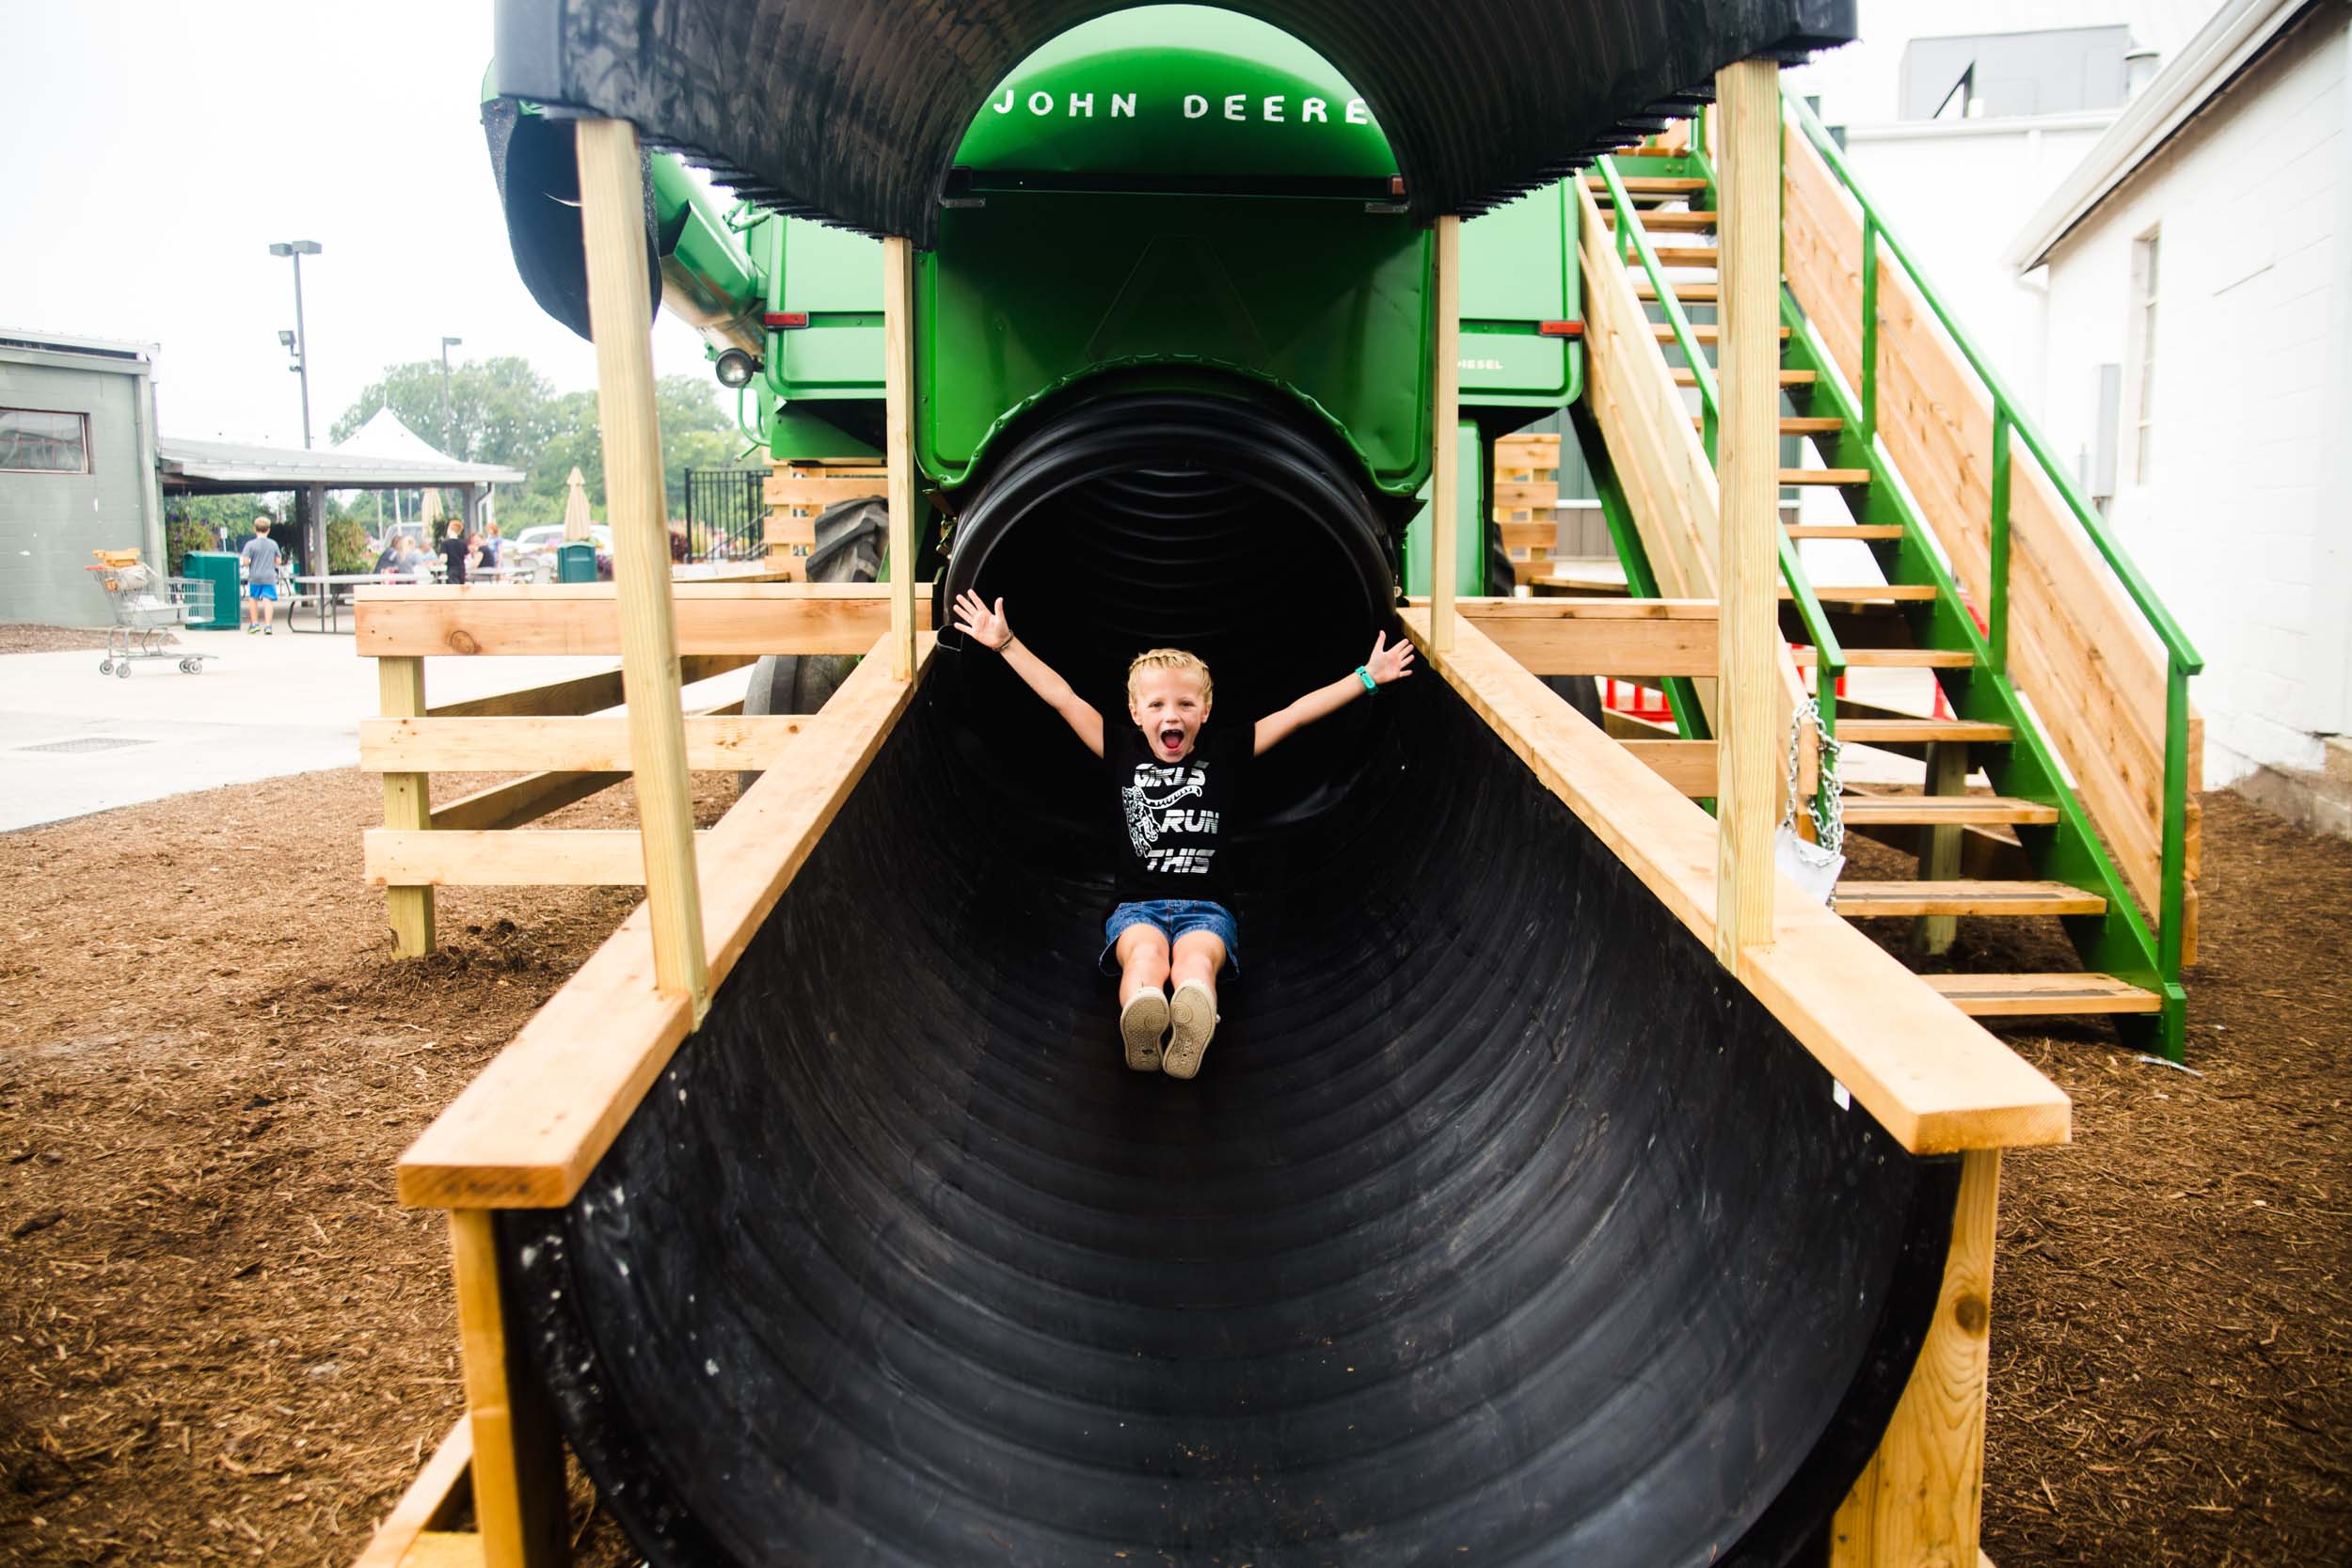 A picture of a child on a slide